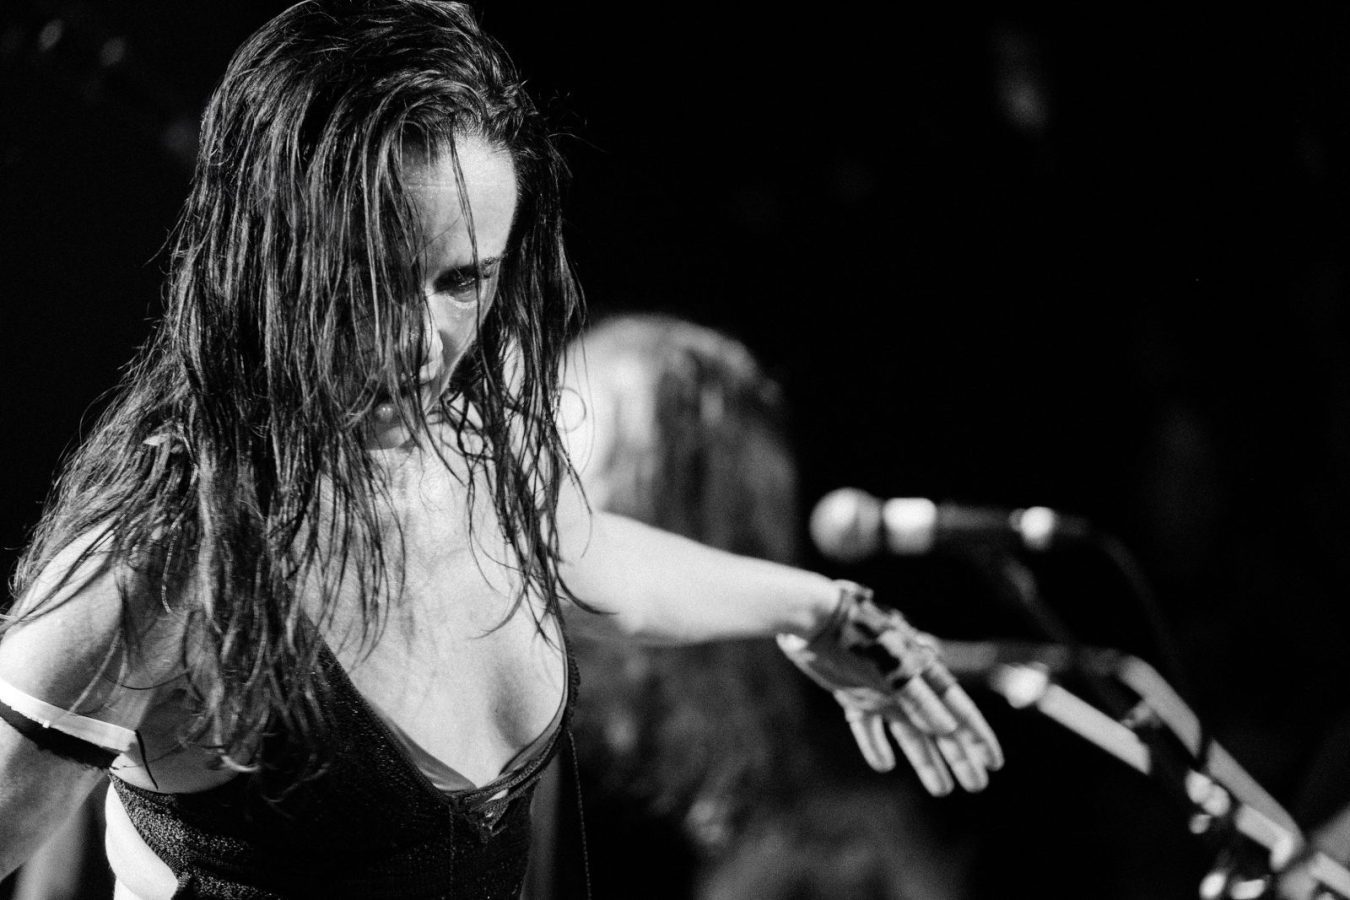 Juliette Lewis and The Licks at Teragram Ballroom, Feb. 28, 2024 shot by Bryan Olinger for Grimy Goods